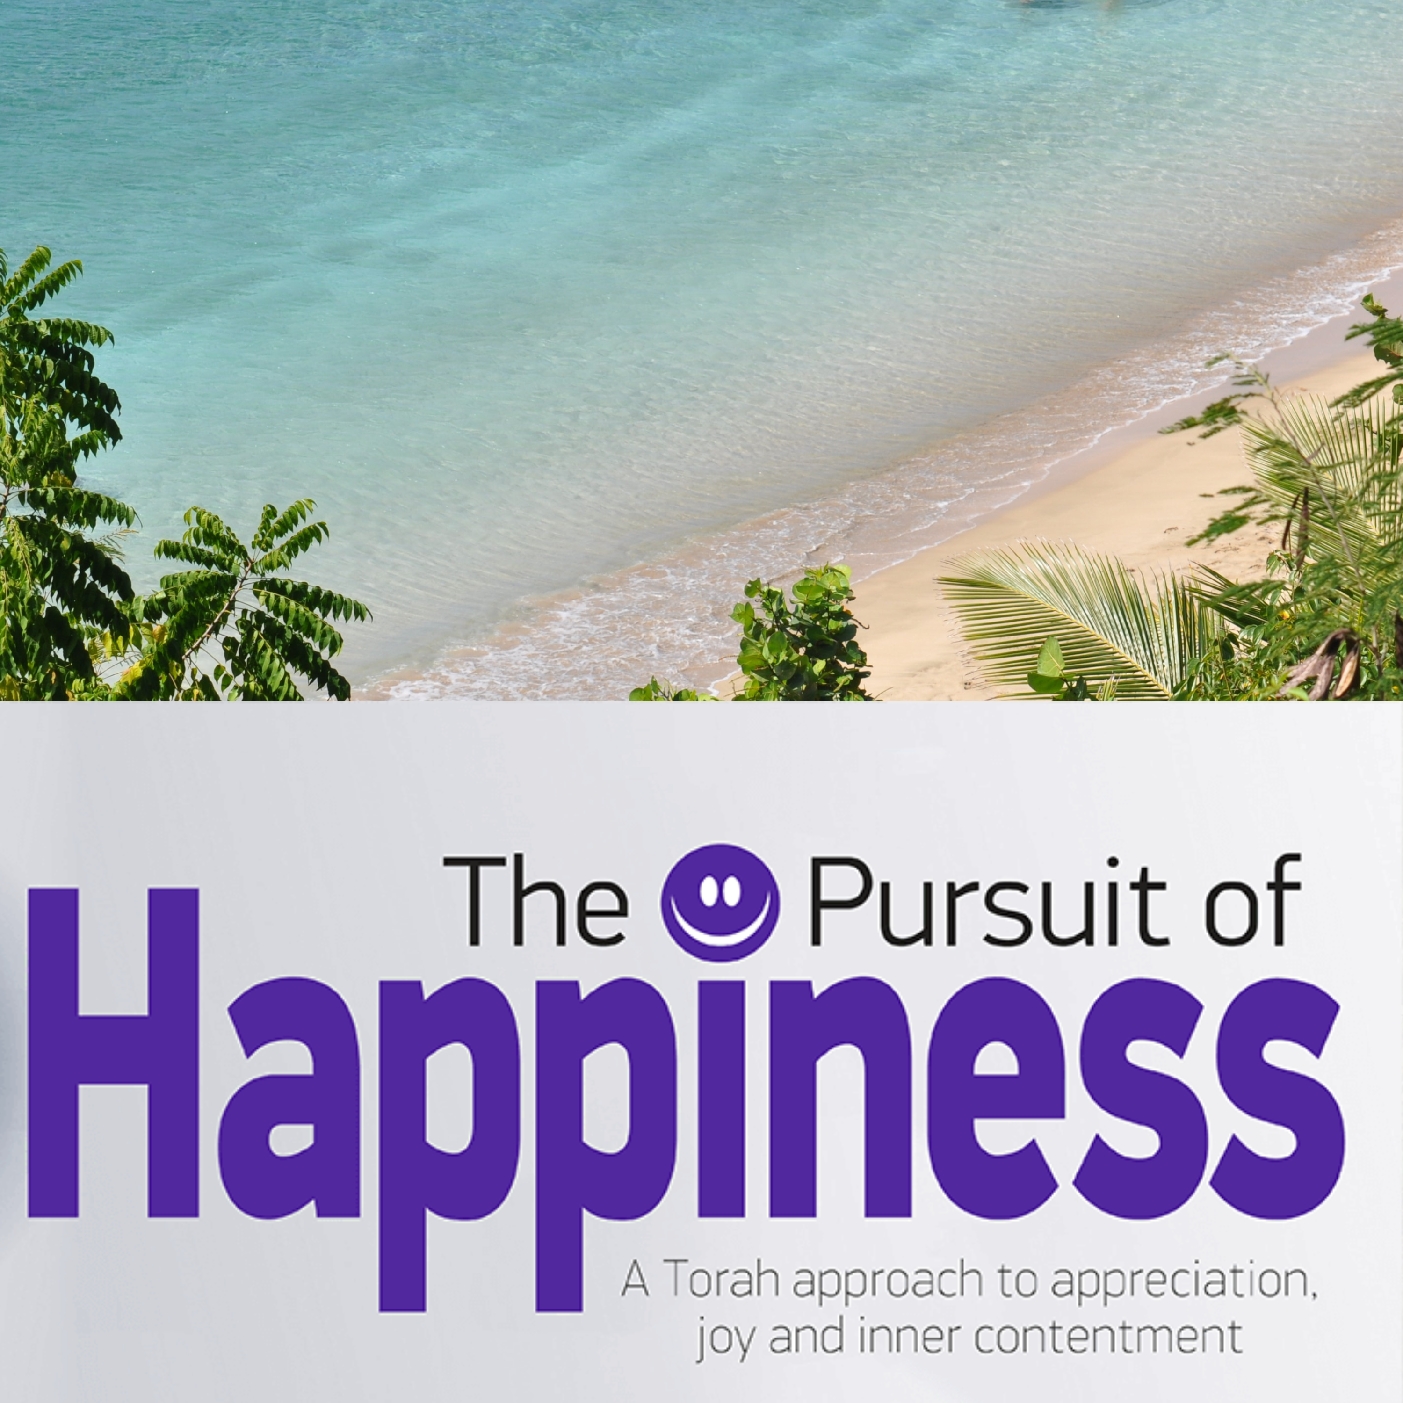 The Pursuit of Happiness- Introduction